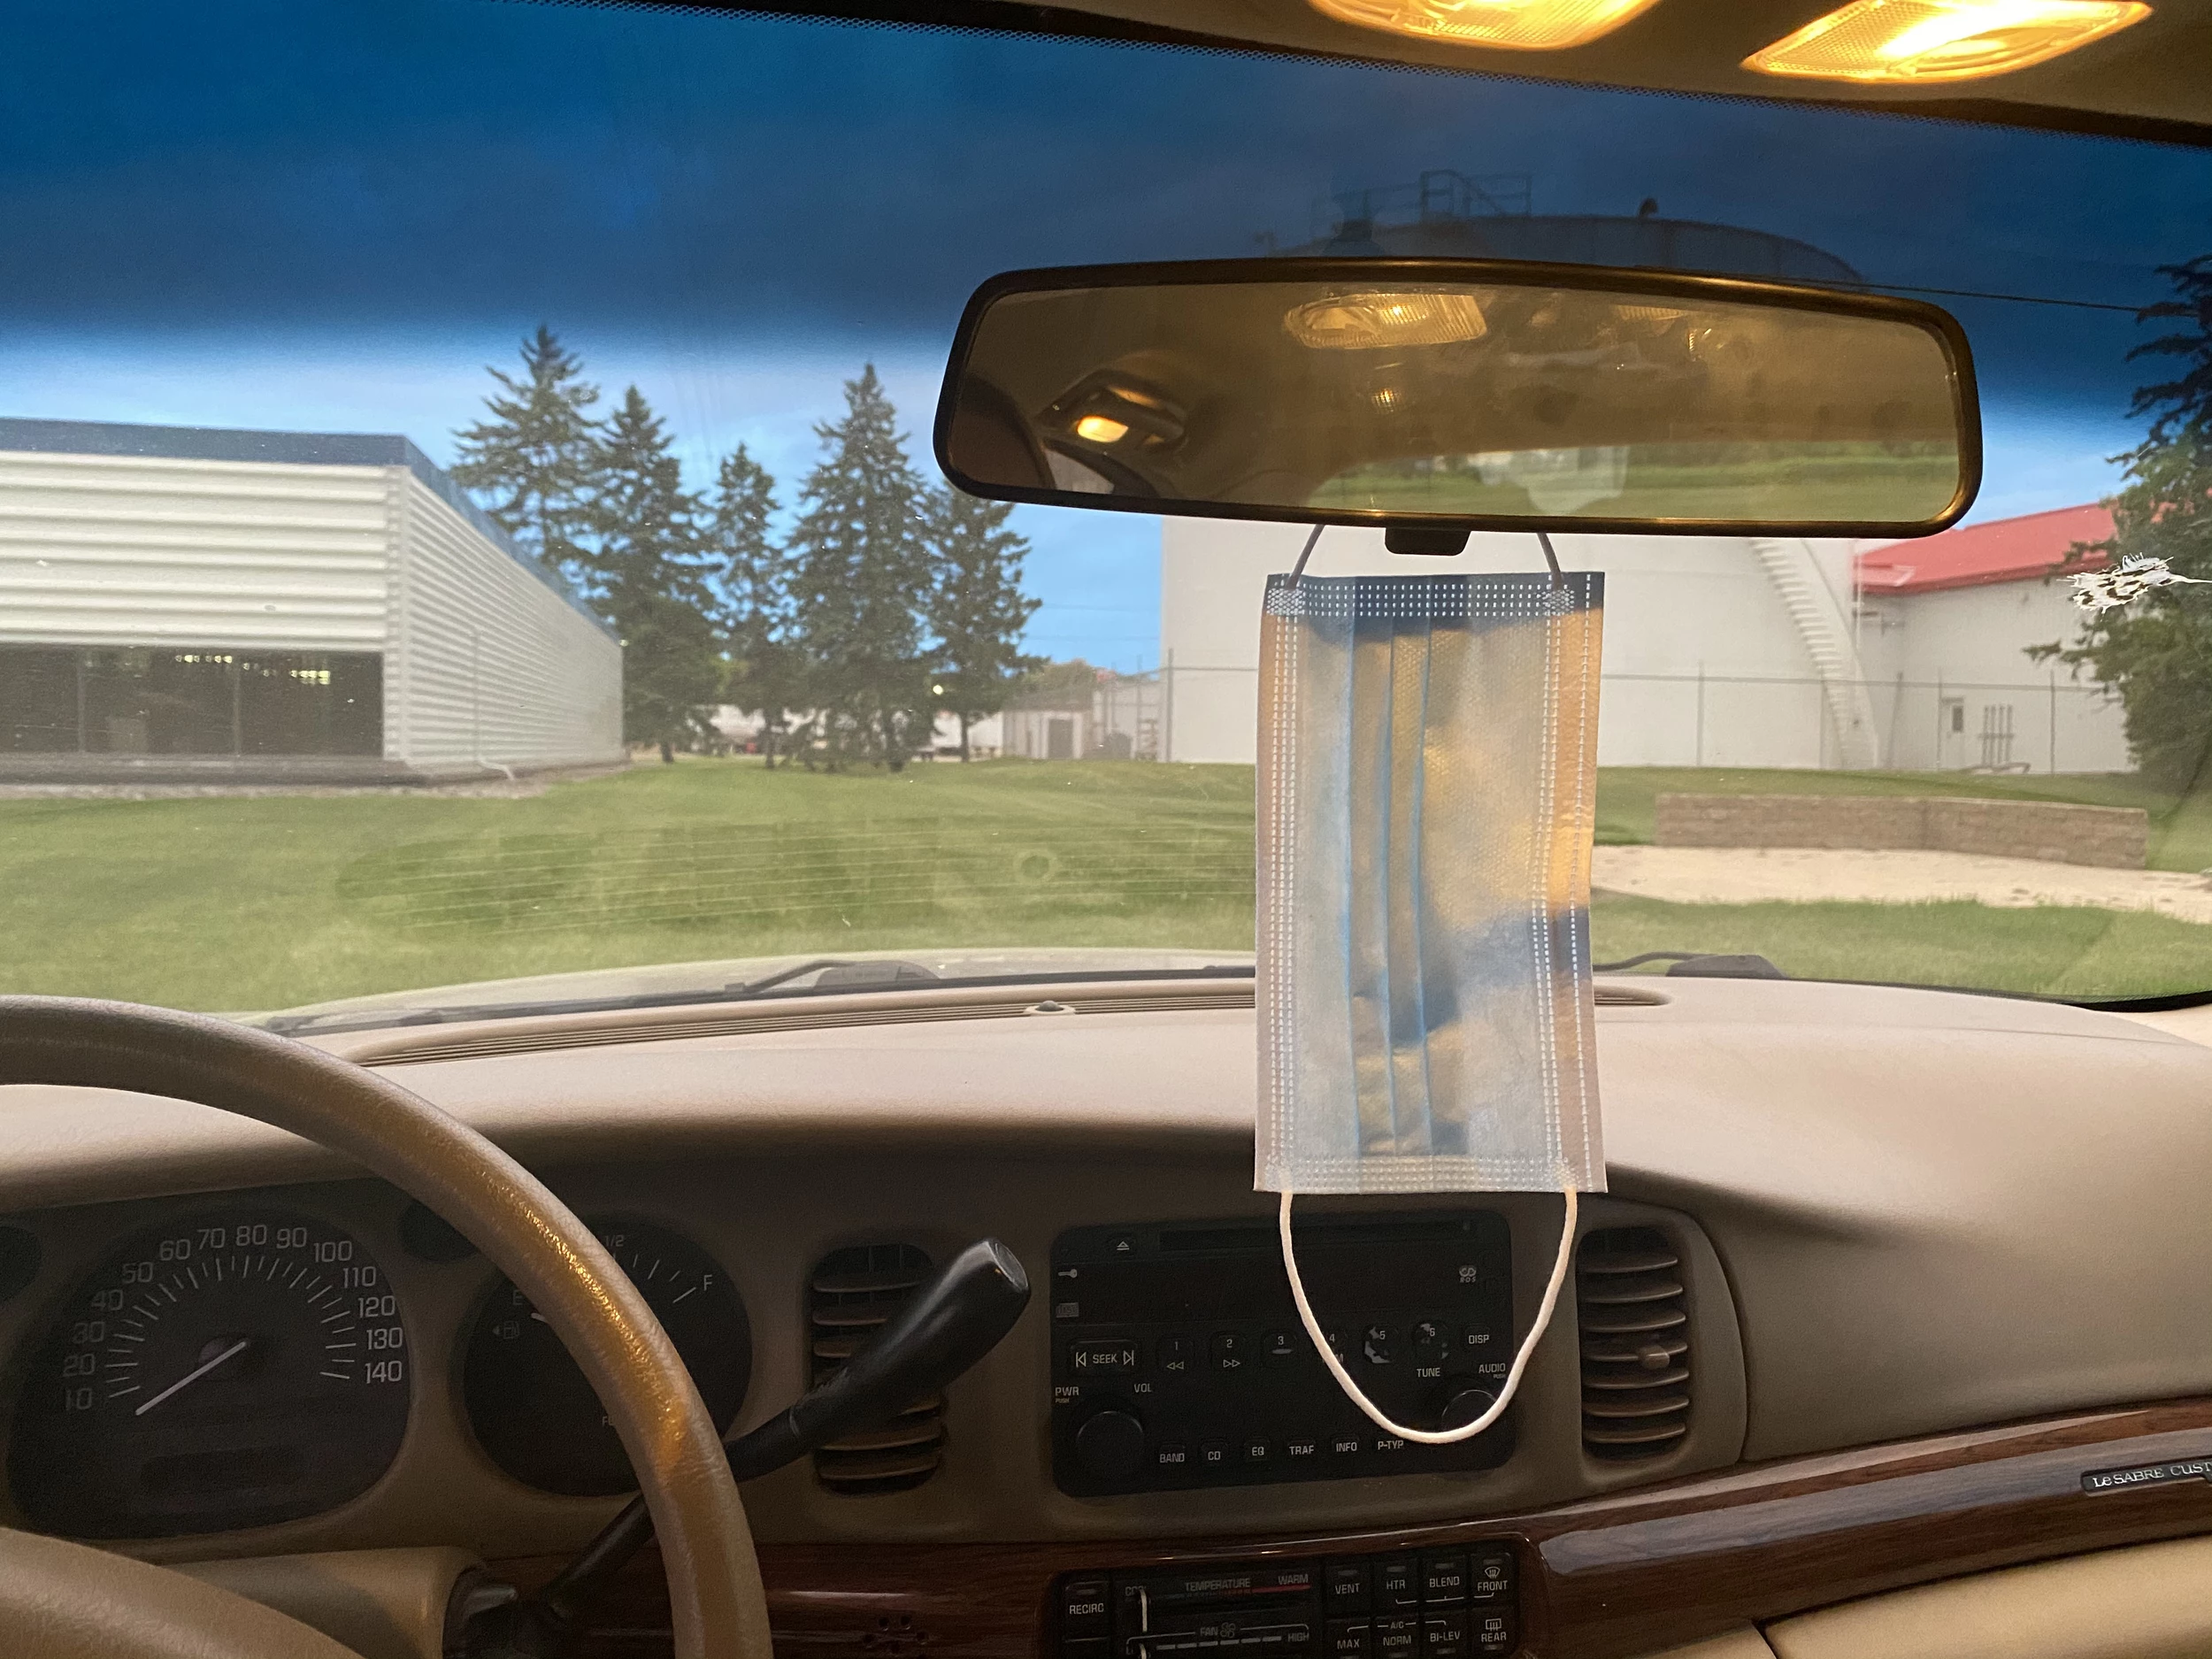 Ask 2: Is it illegal to hang items on your rearview mirror inside your  vehicle?